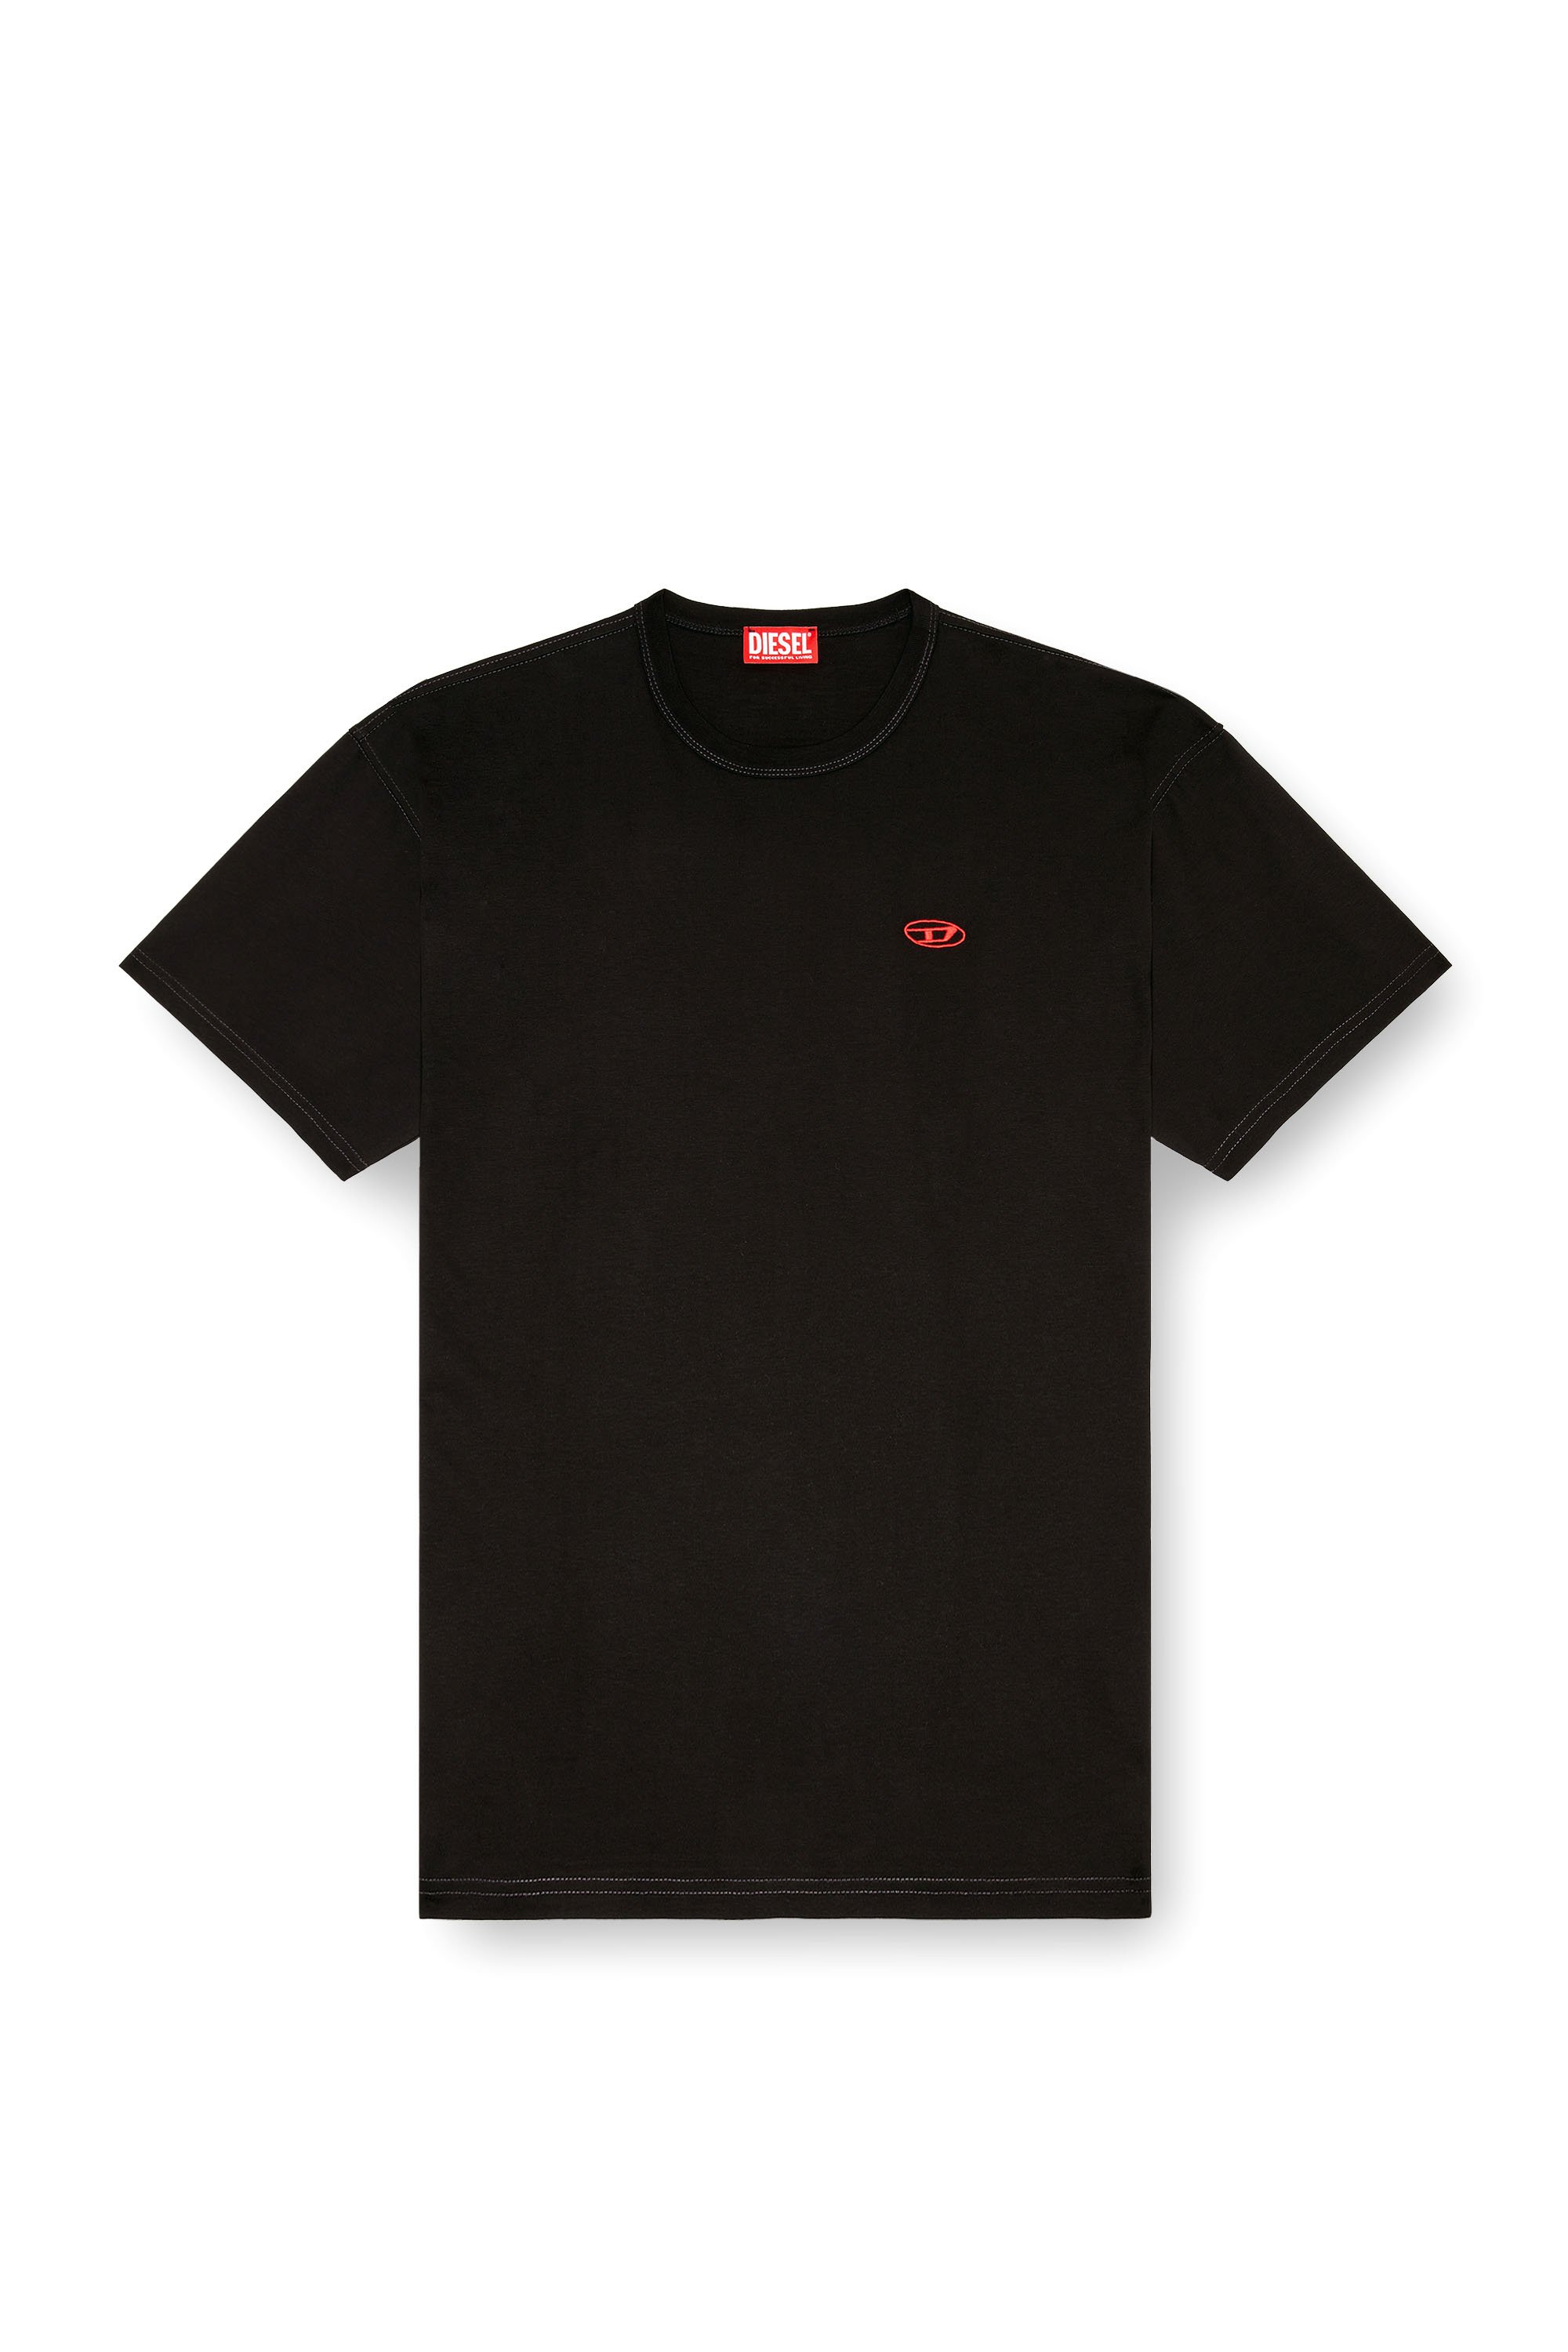 Diesel - T-BOXT-K18, Male T-shirt with Oval D print and embroidery in Black - Image 4